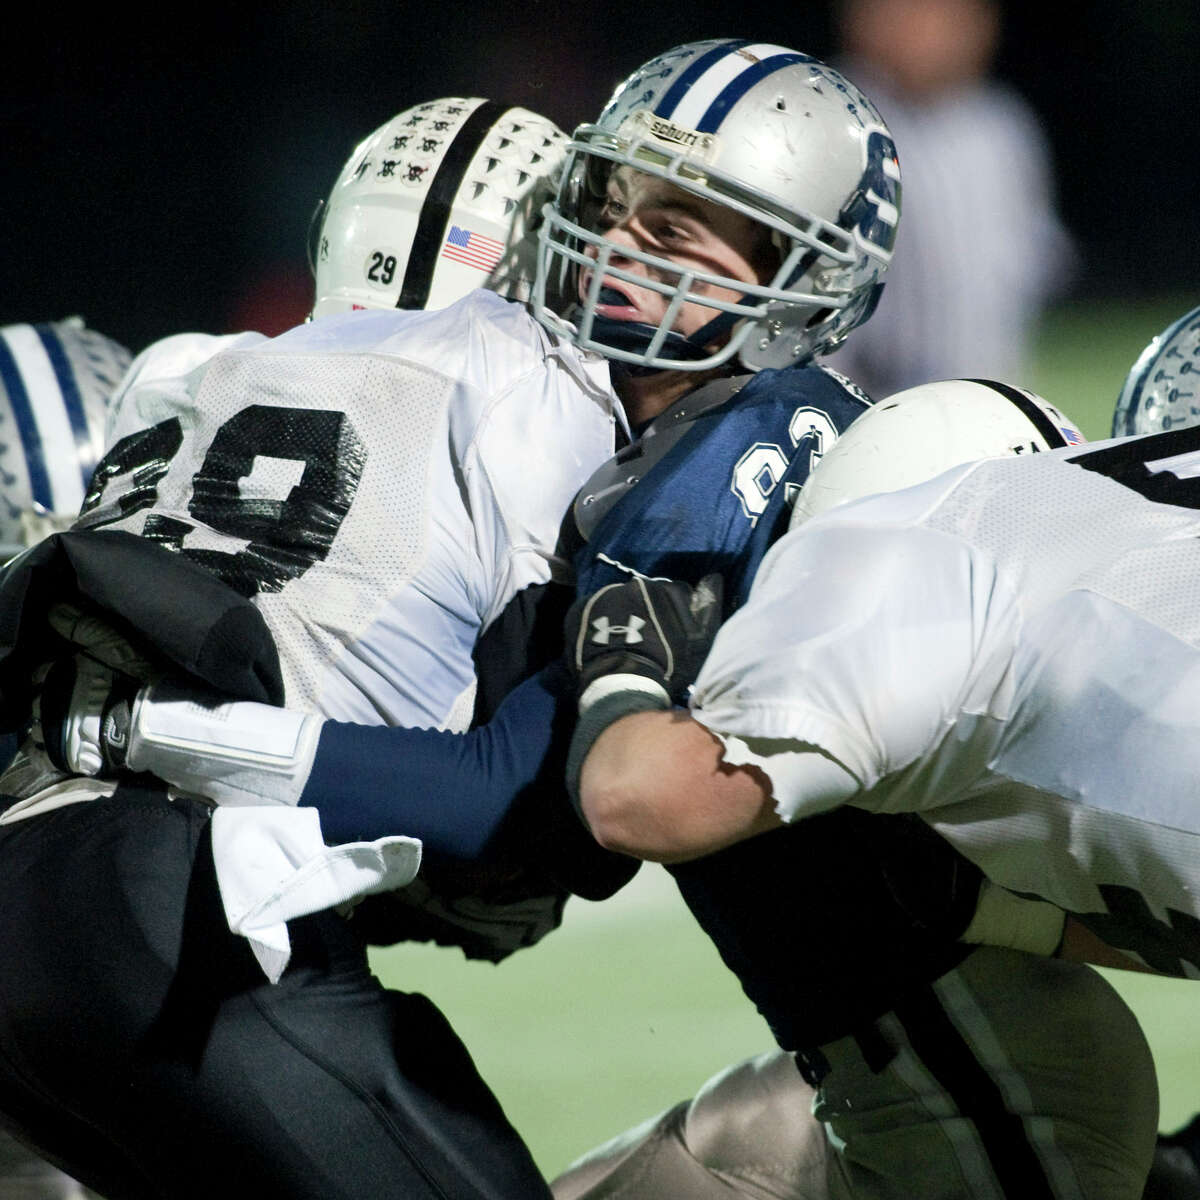 Chris Coyne, playing football for Westport's Staples High School during a playoff game on Dec. 1, 2009. Coyne, a senior at Yale University suffered multiple concussions. The last one, at Yale, ended his playing career.